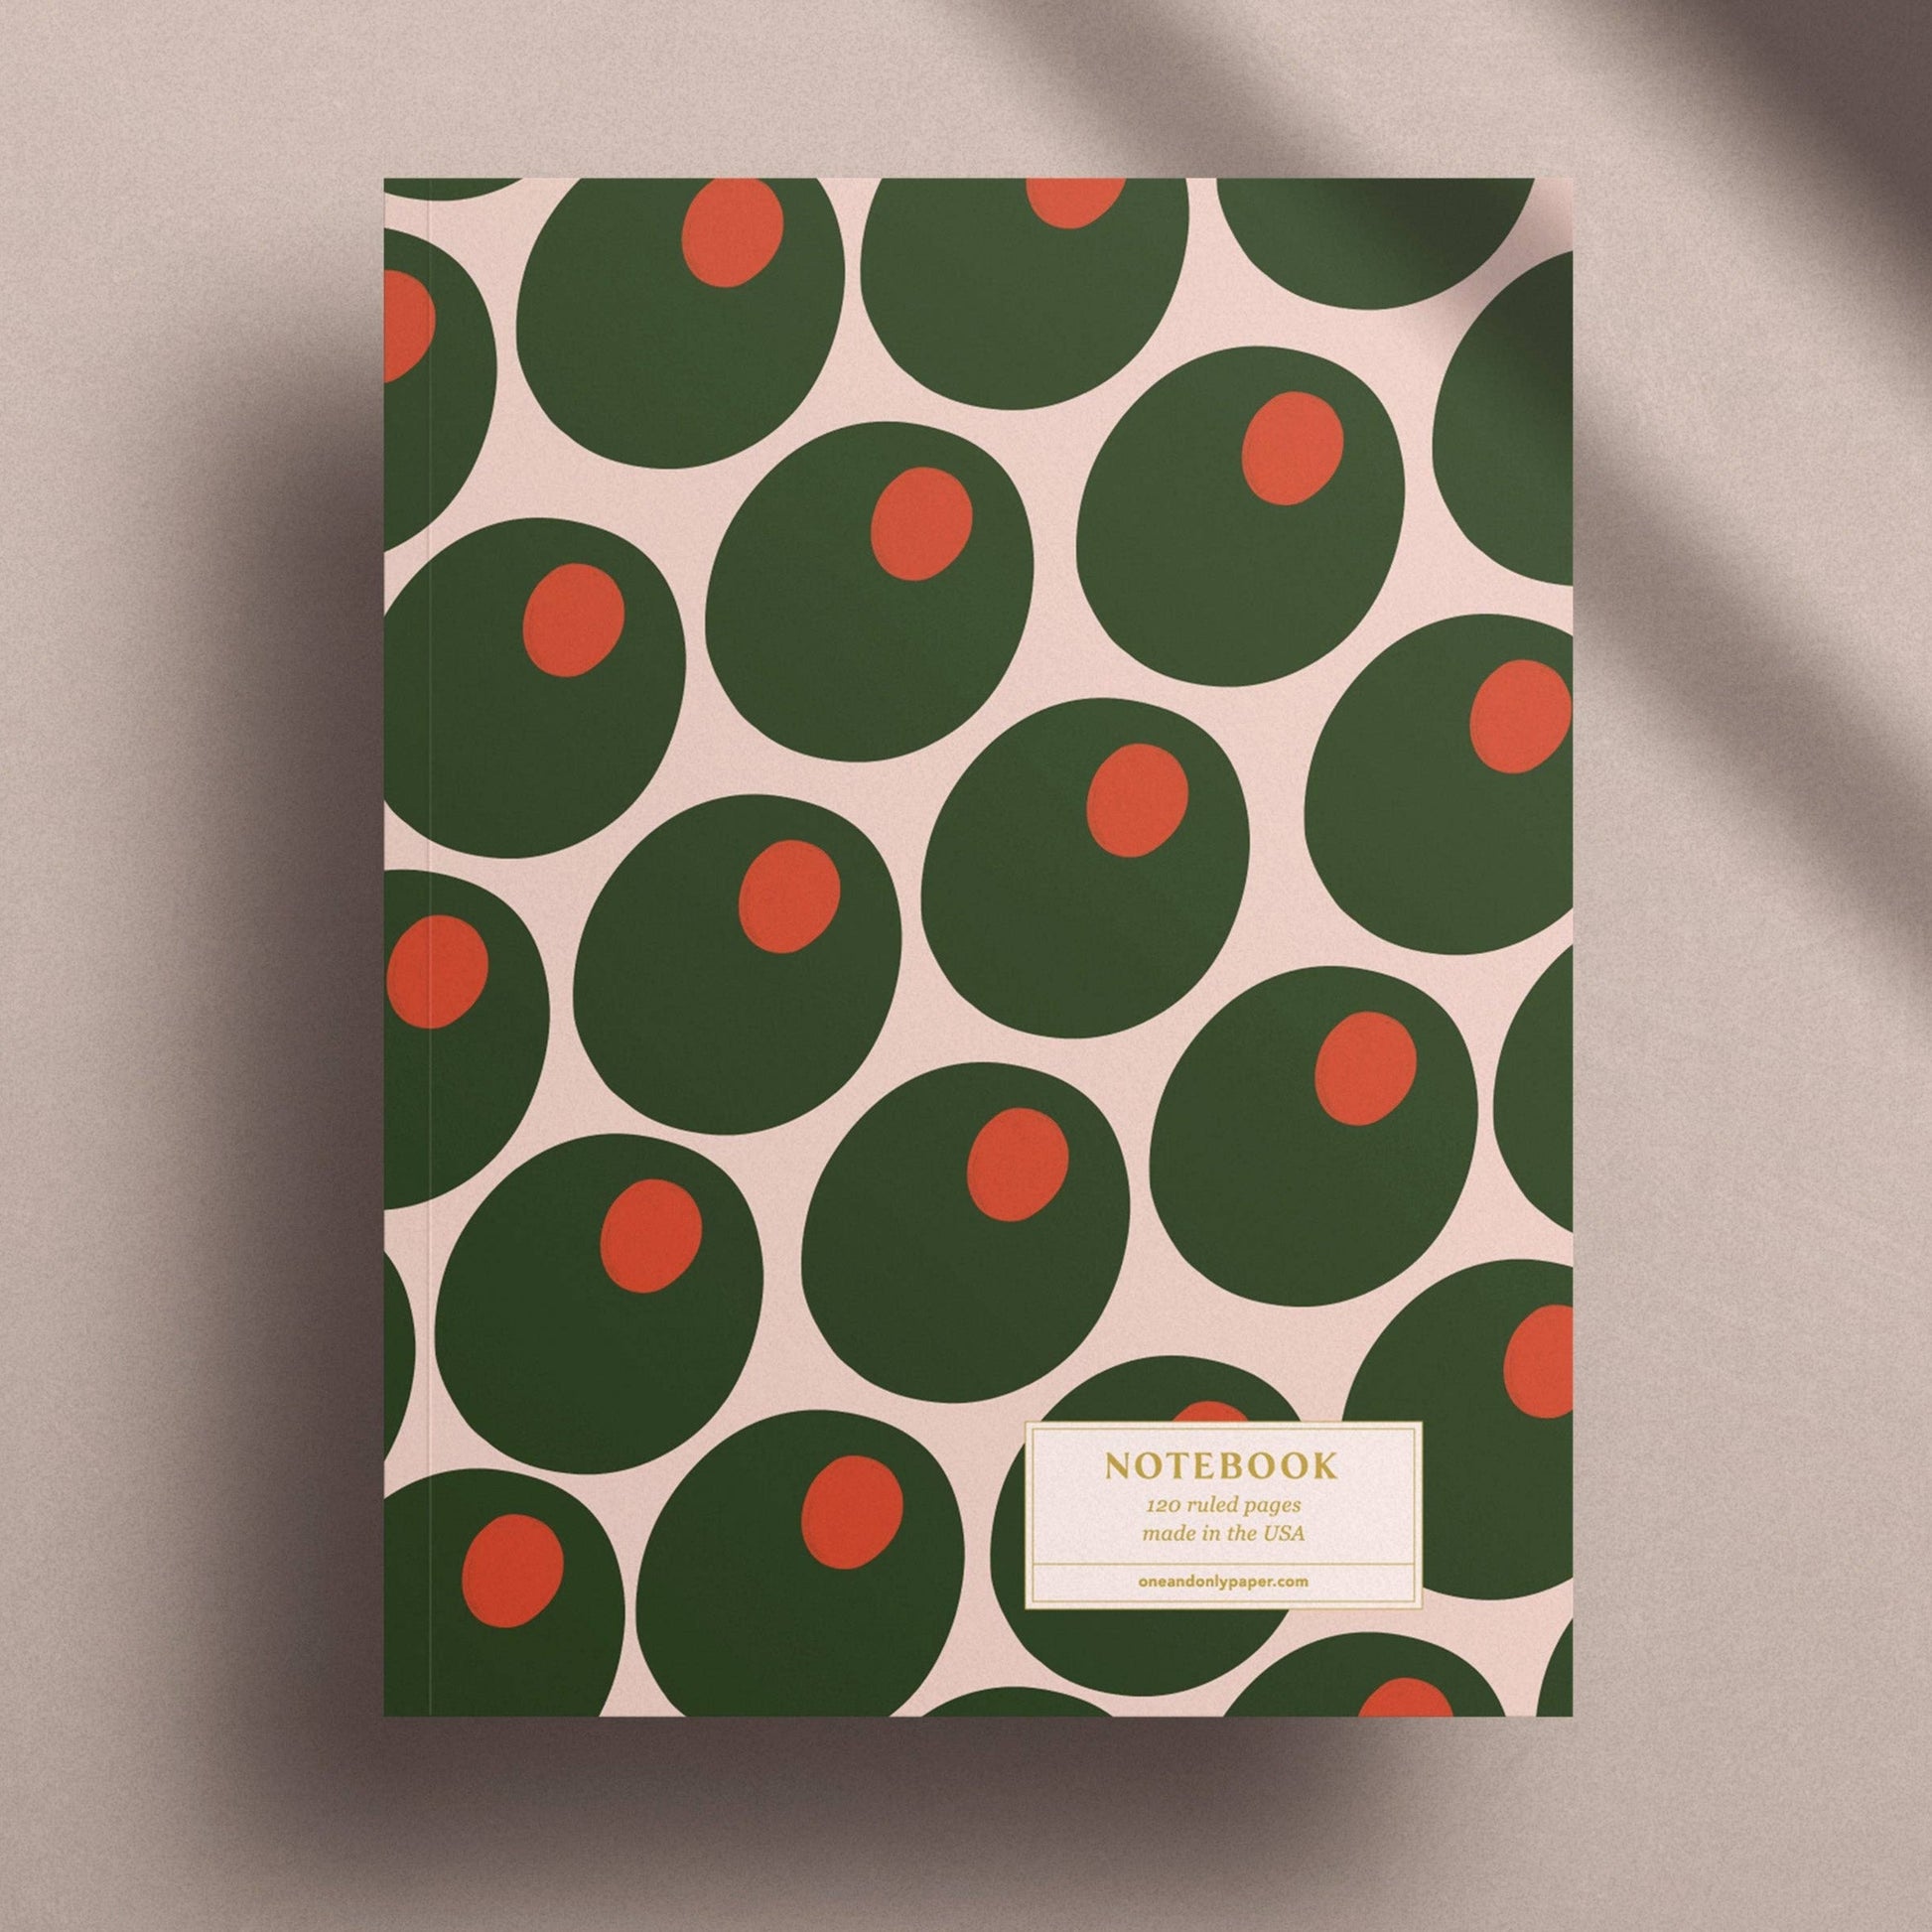 Notebook with pimento olives as the cover design